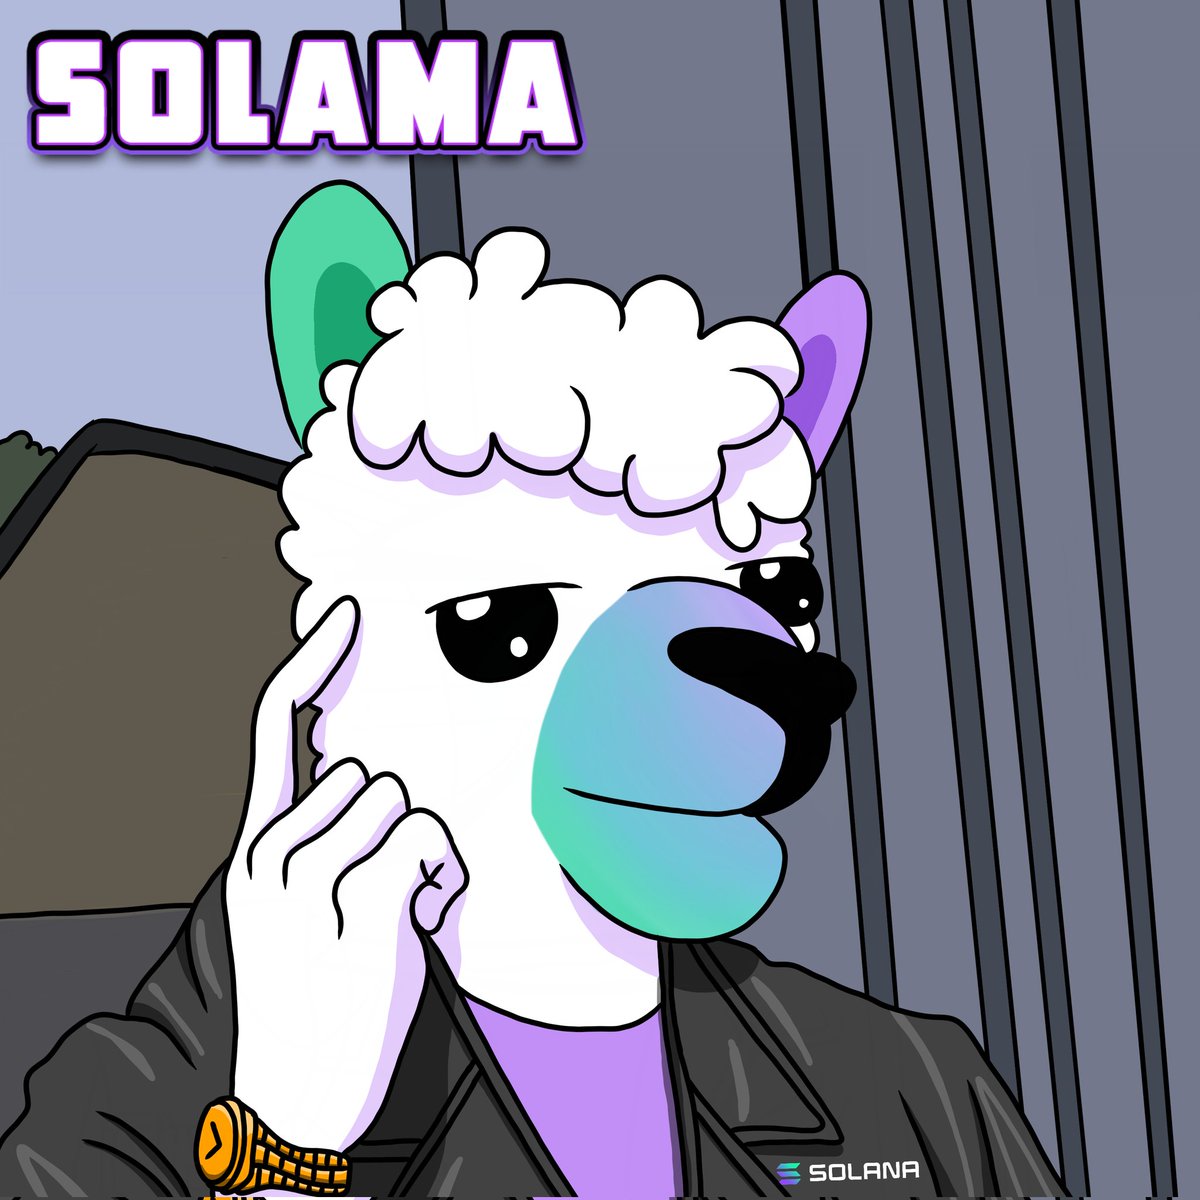 $SOLAMA The Official “Unofficial” Mascot of #Solana

Think about it...